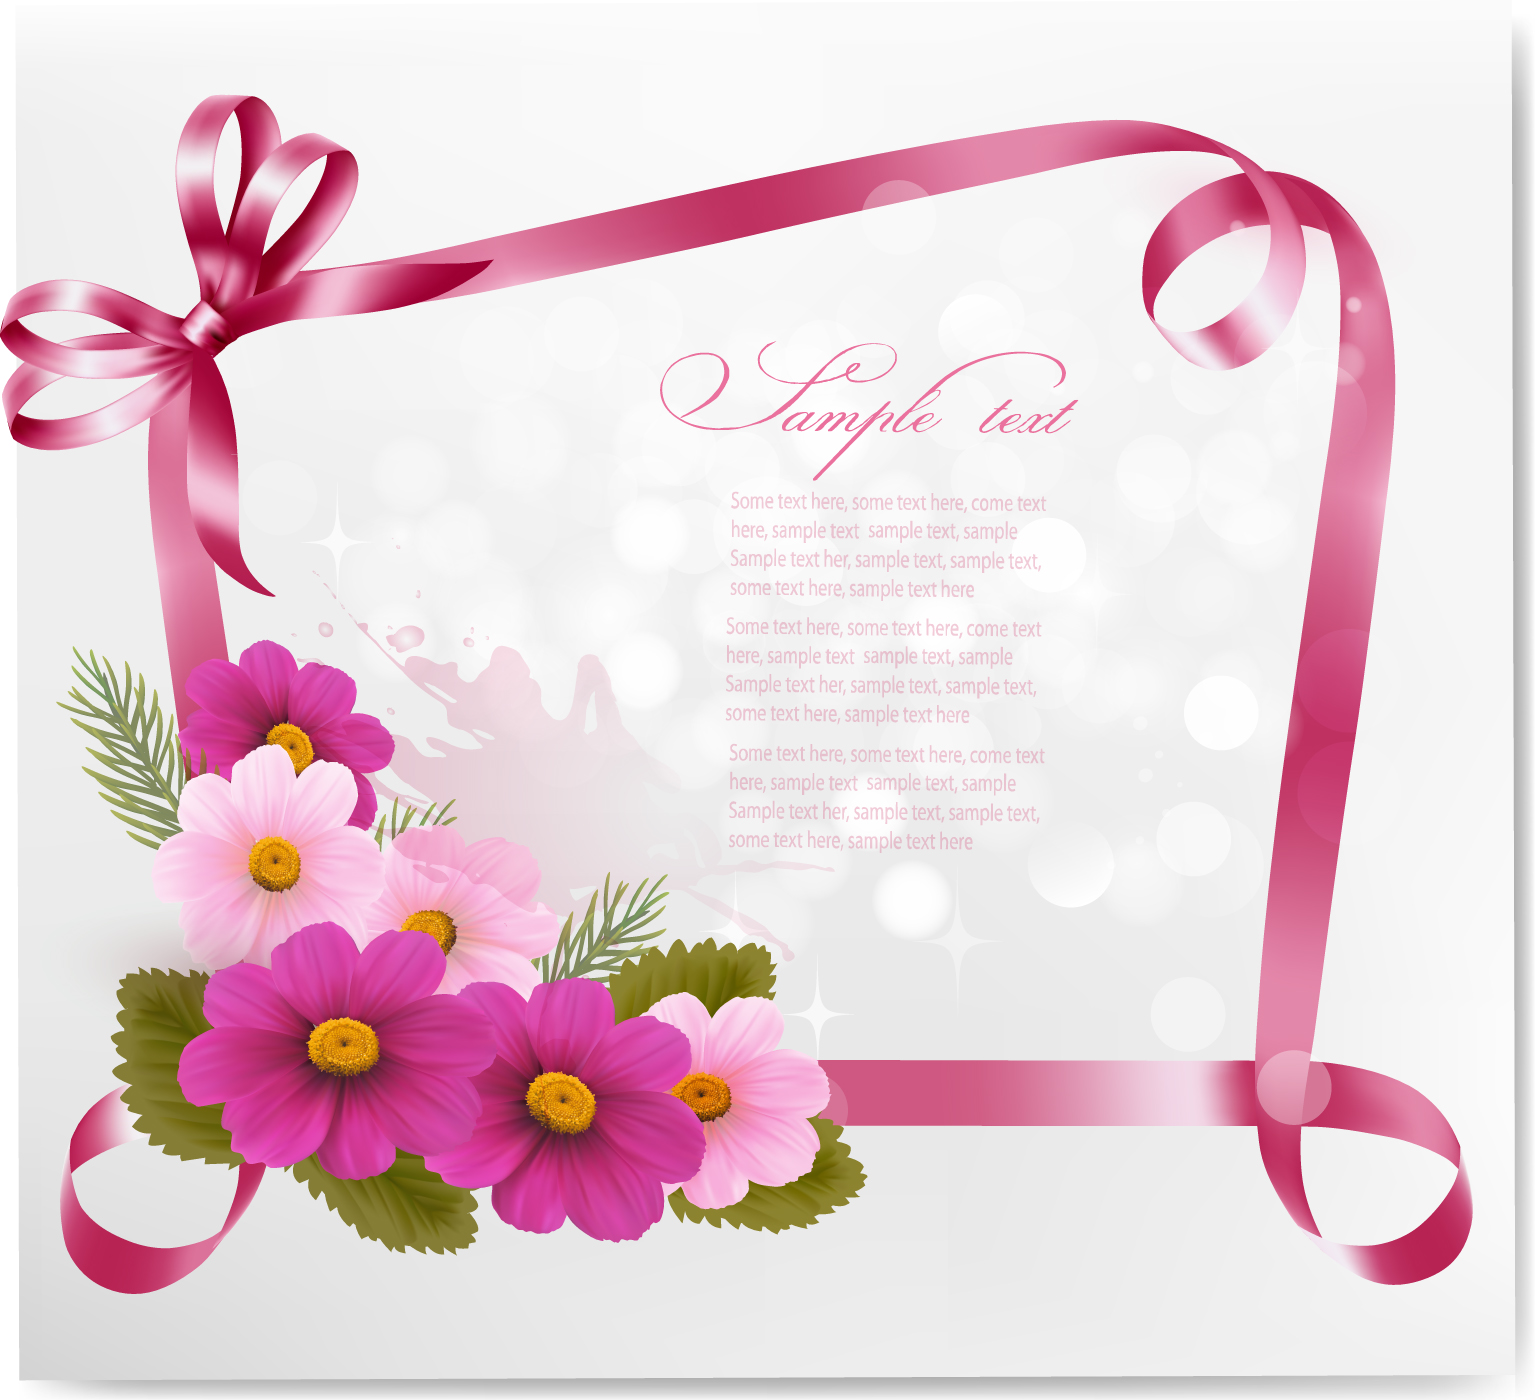 ribbon-with-flower-greeting-card-vector-02-over-millions-vectors-stock-photos-hd-pictures